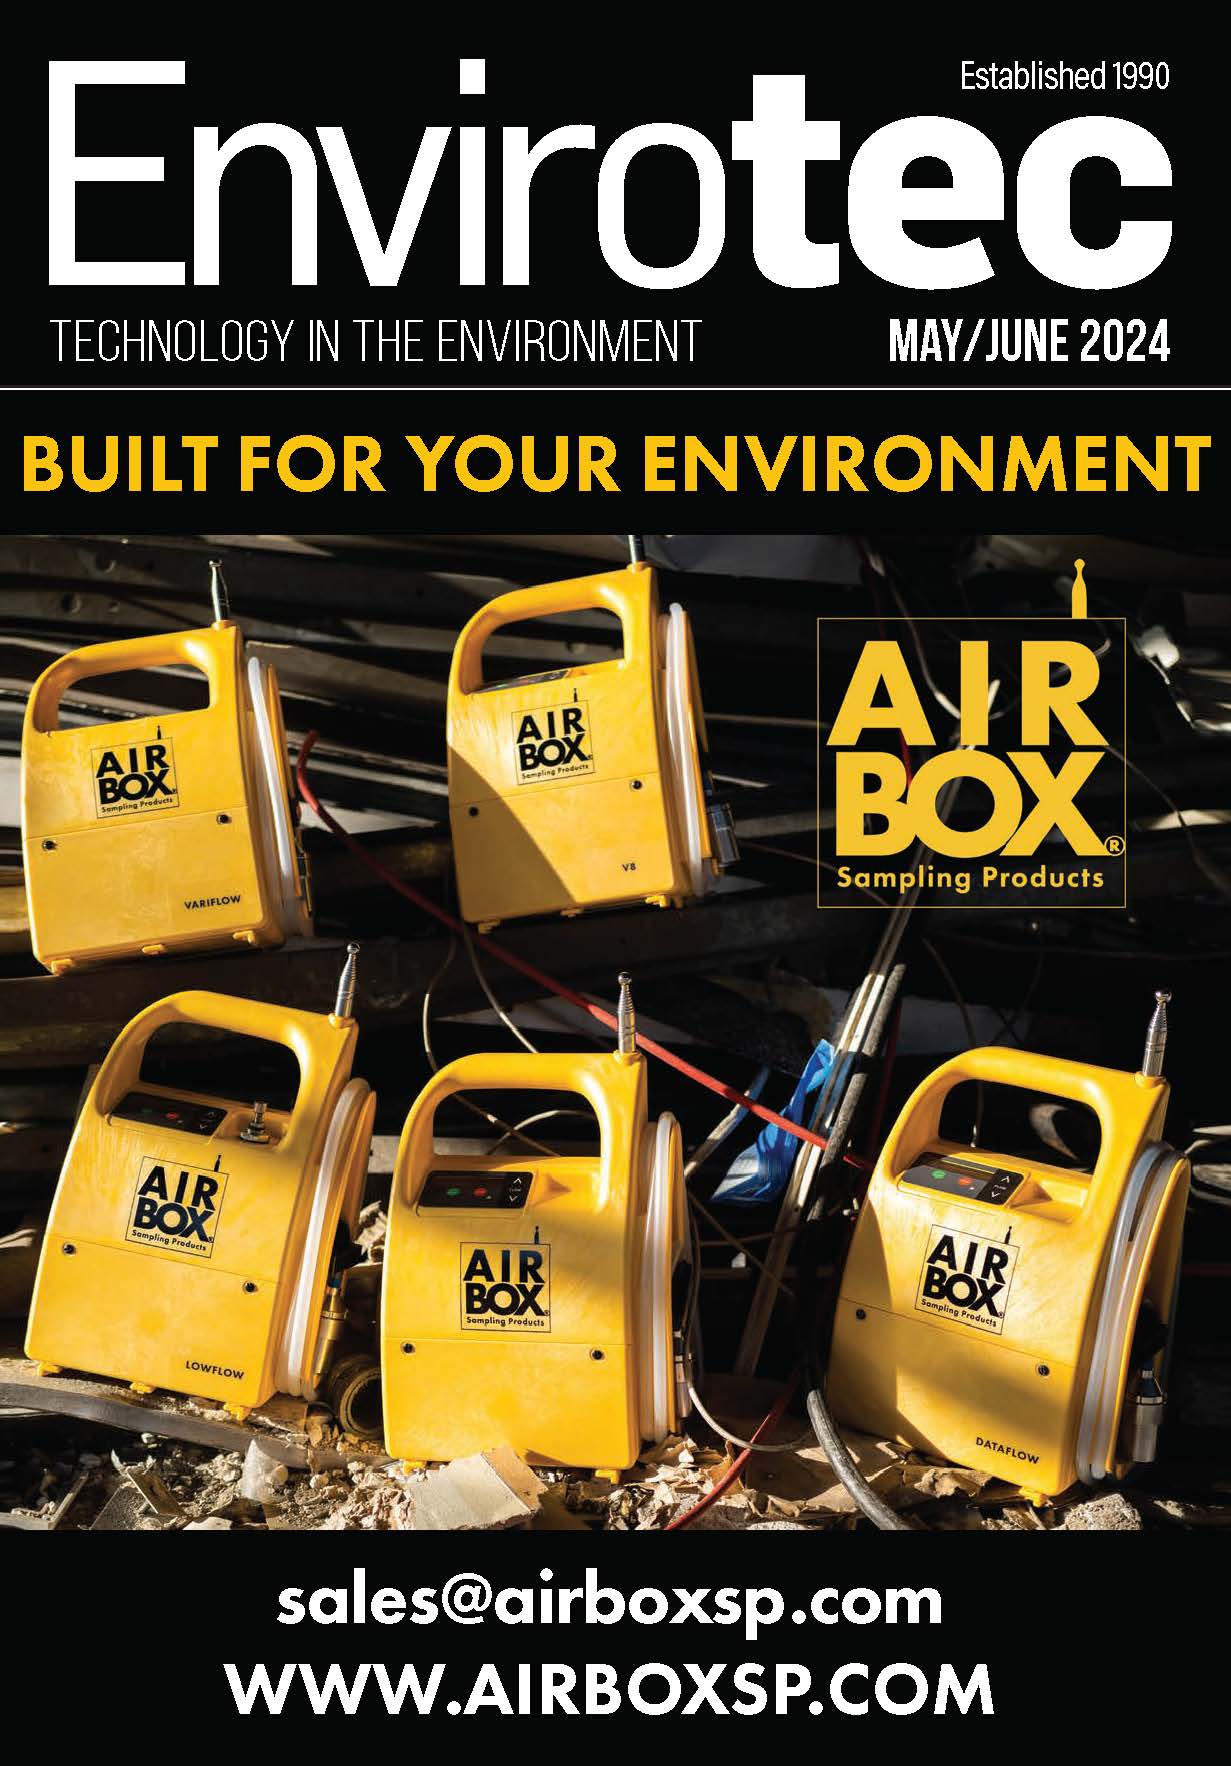 Envirotec Magazine front cover May 24 edition